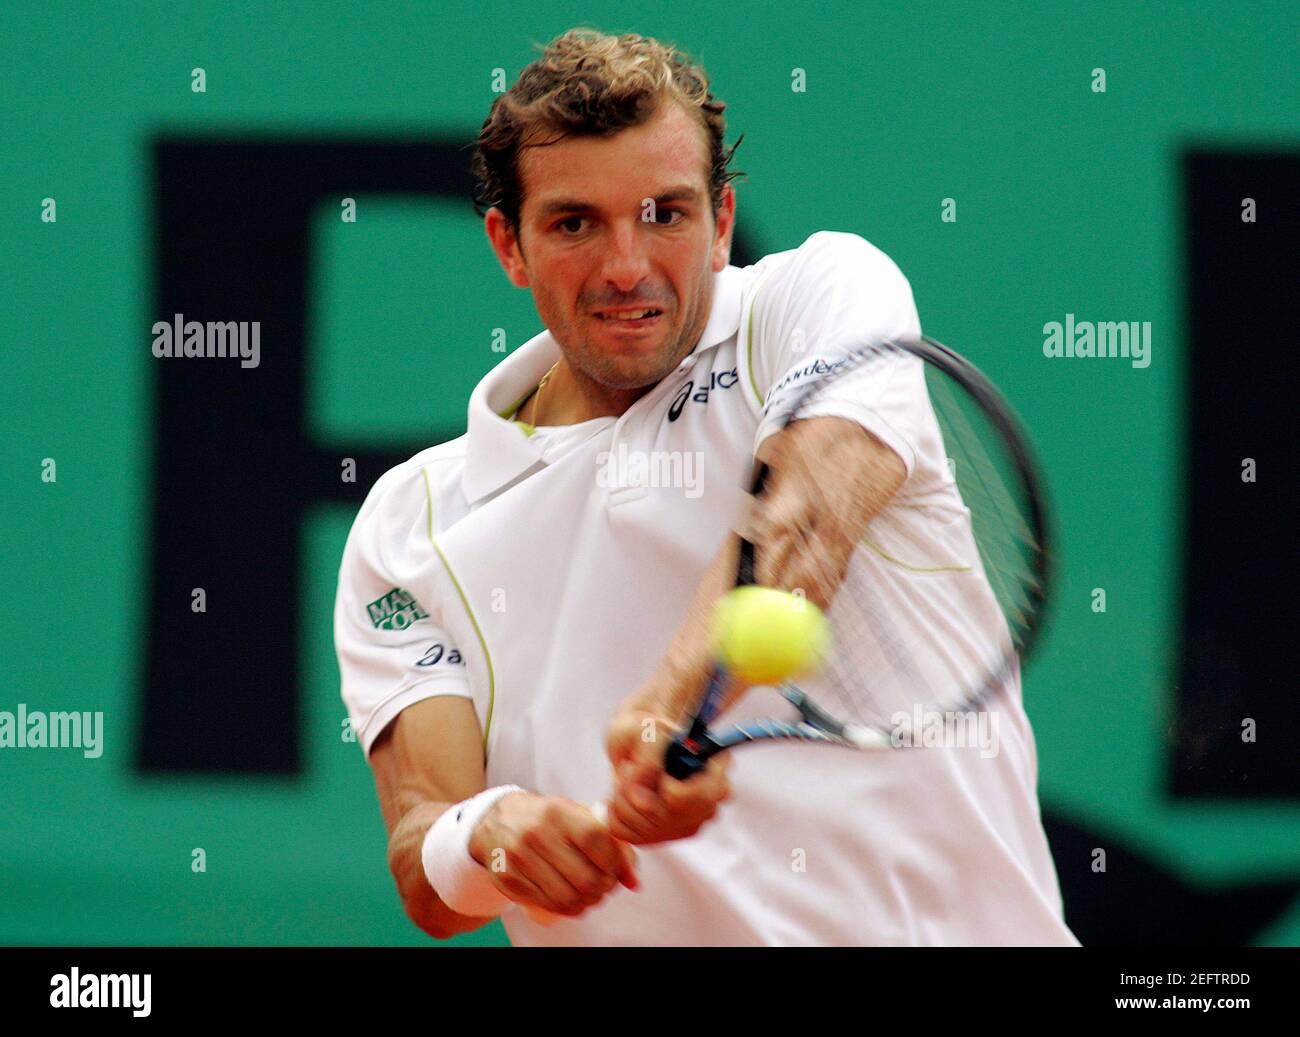 Tennis - French Open - Roland Garros, Paris, France - 2/6/08 France's  Julienne Benneteau in action during the fourth round Mandatory Credit:  Action Images / Jason O'Brien Livepic Stock Photo - Alamy